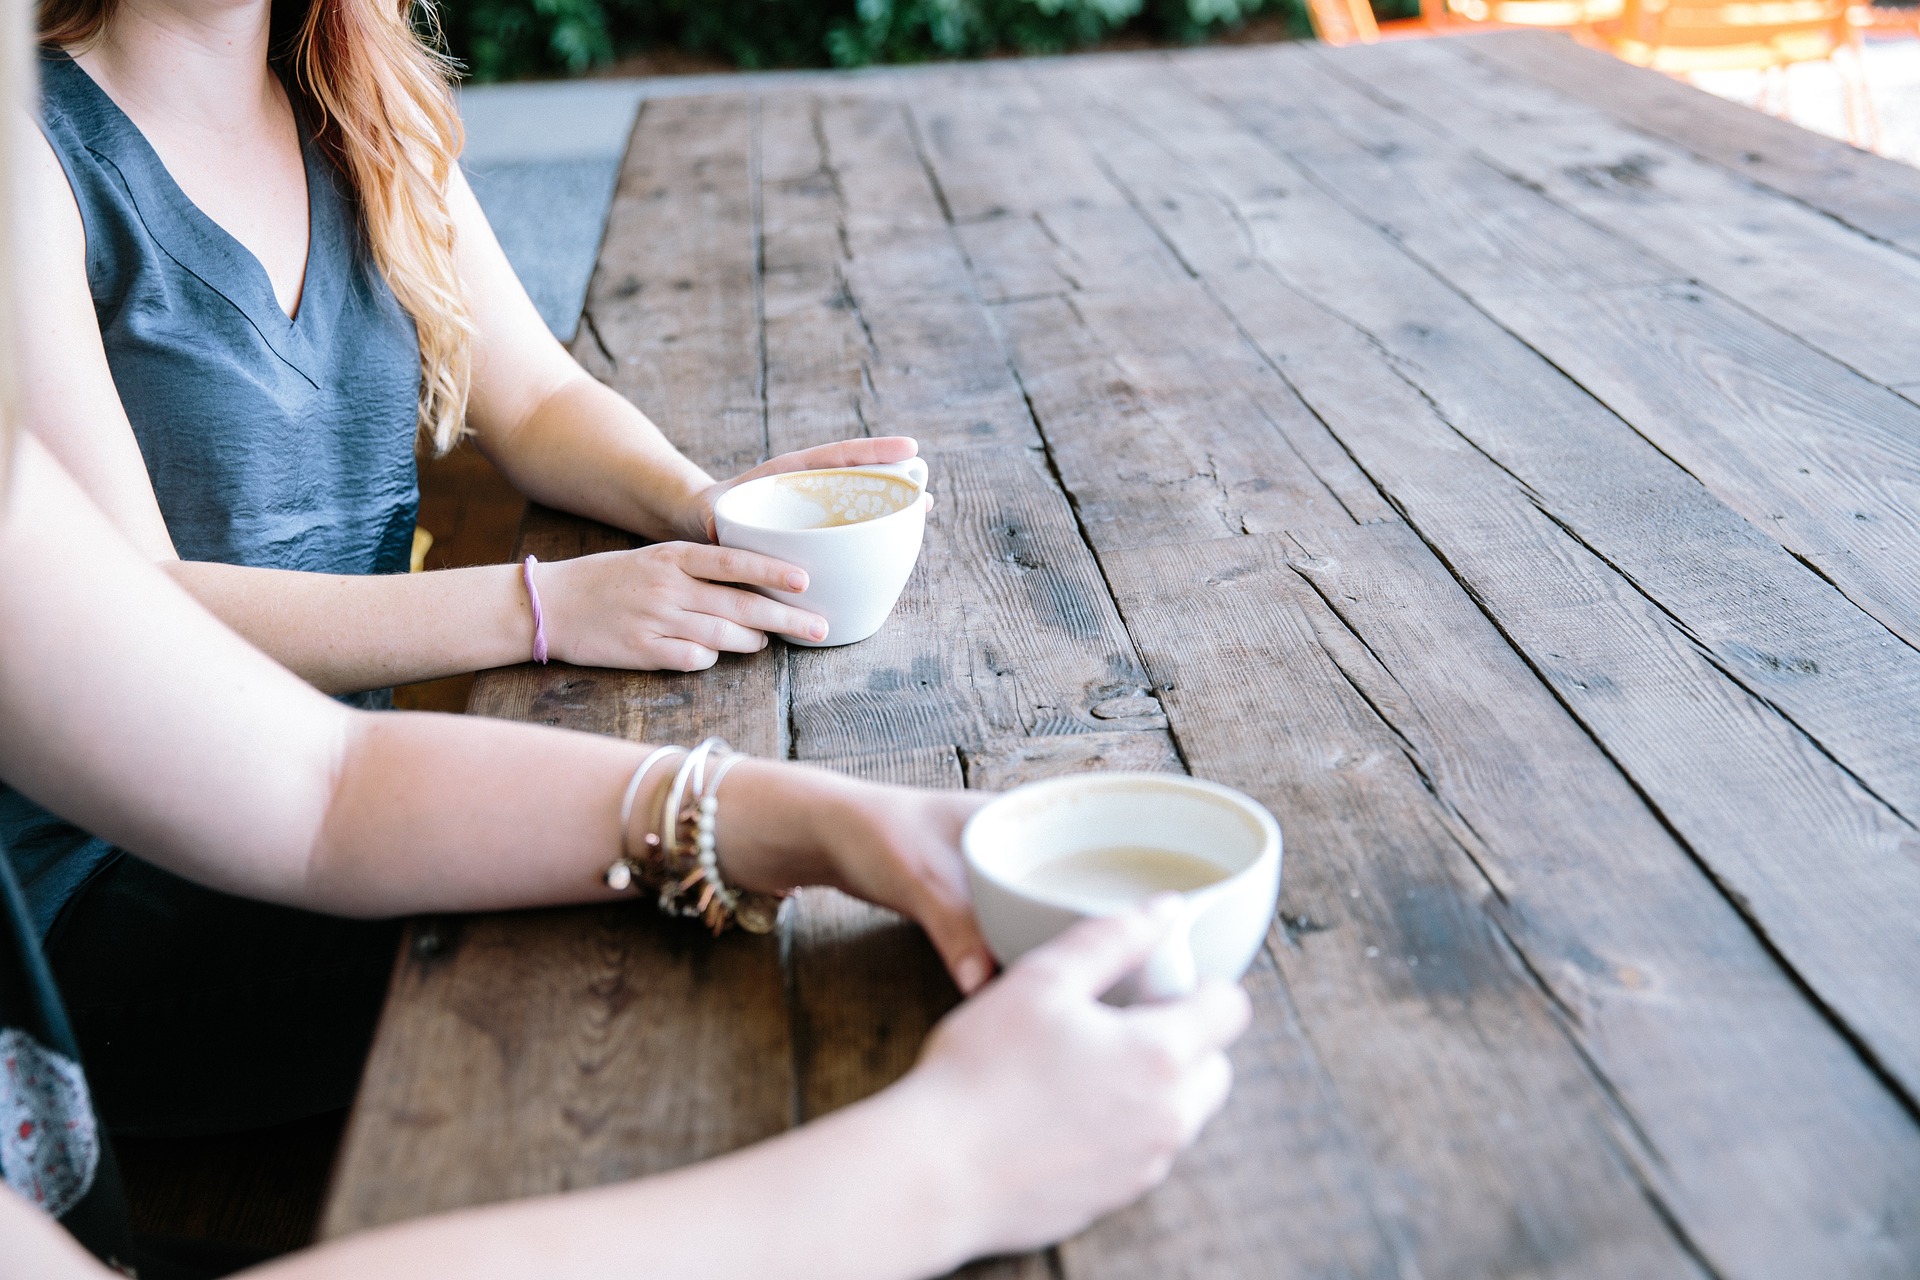 Two people sitting next to each with coffee cups. Stock photo.